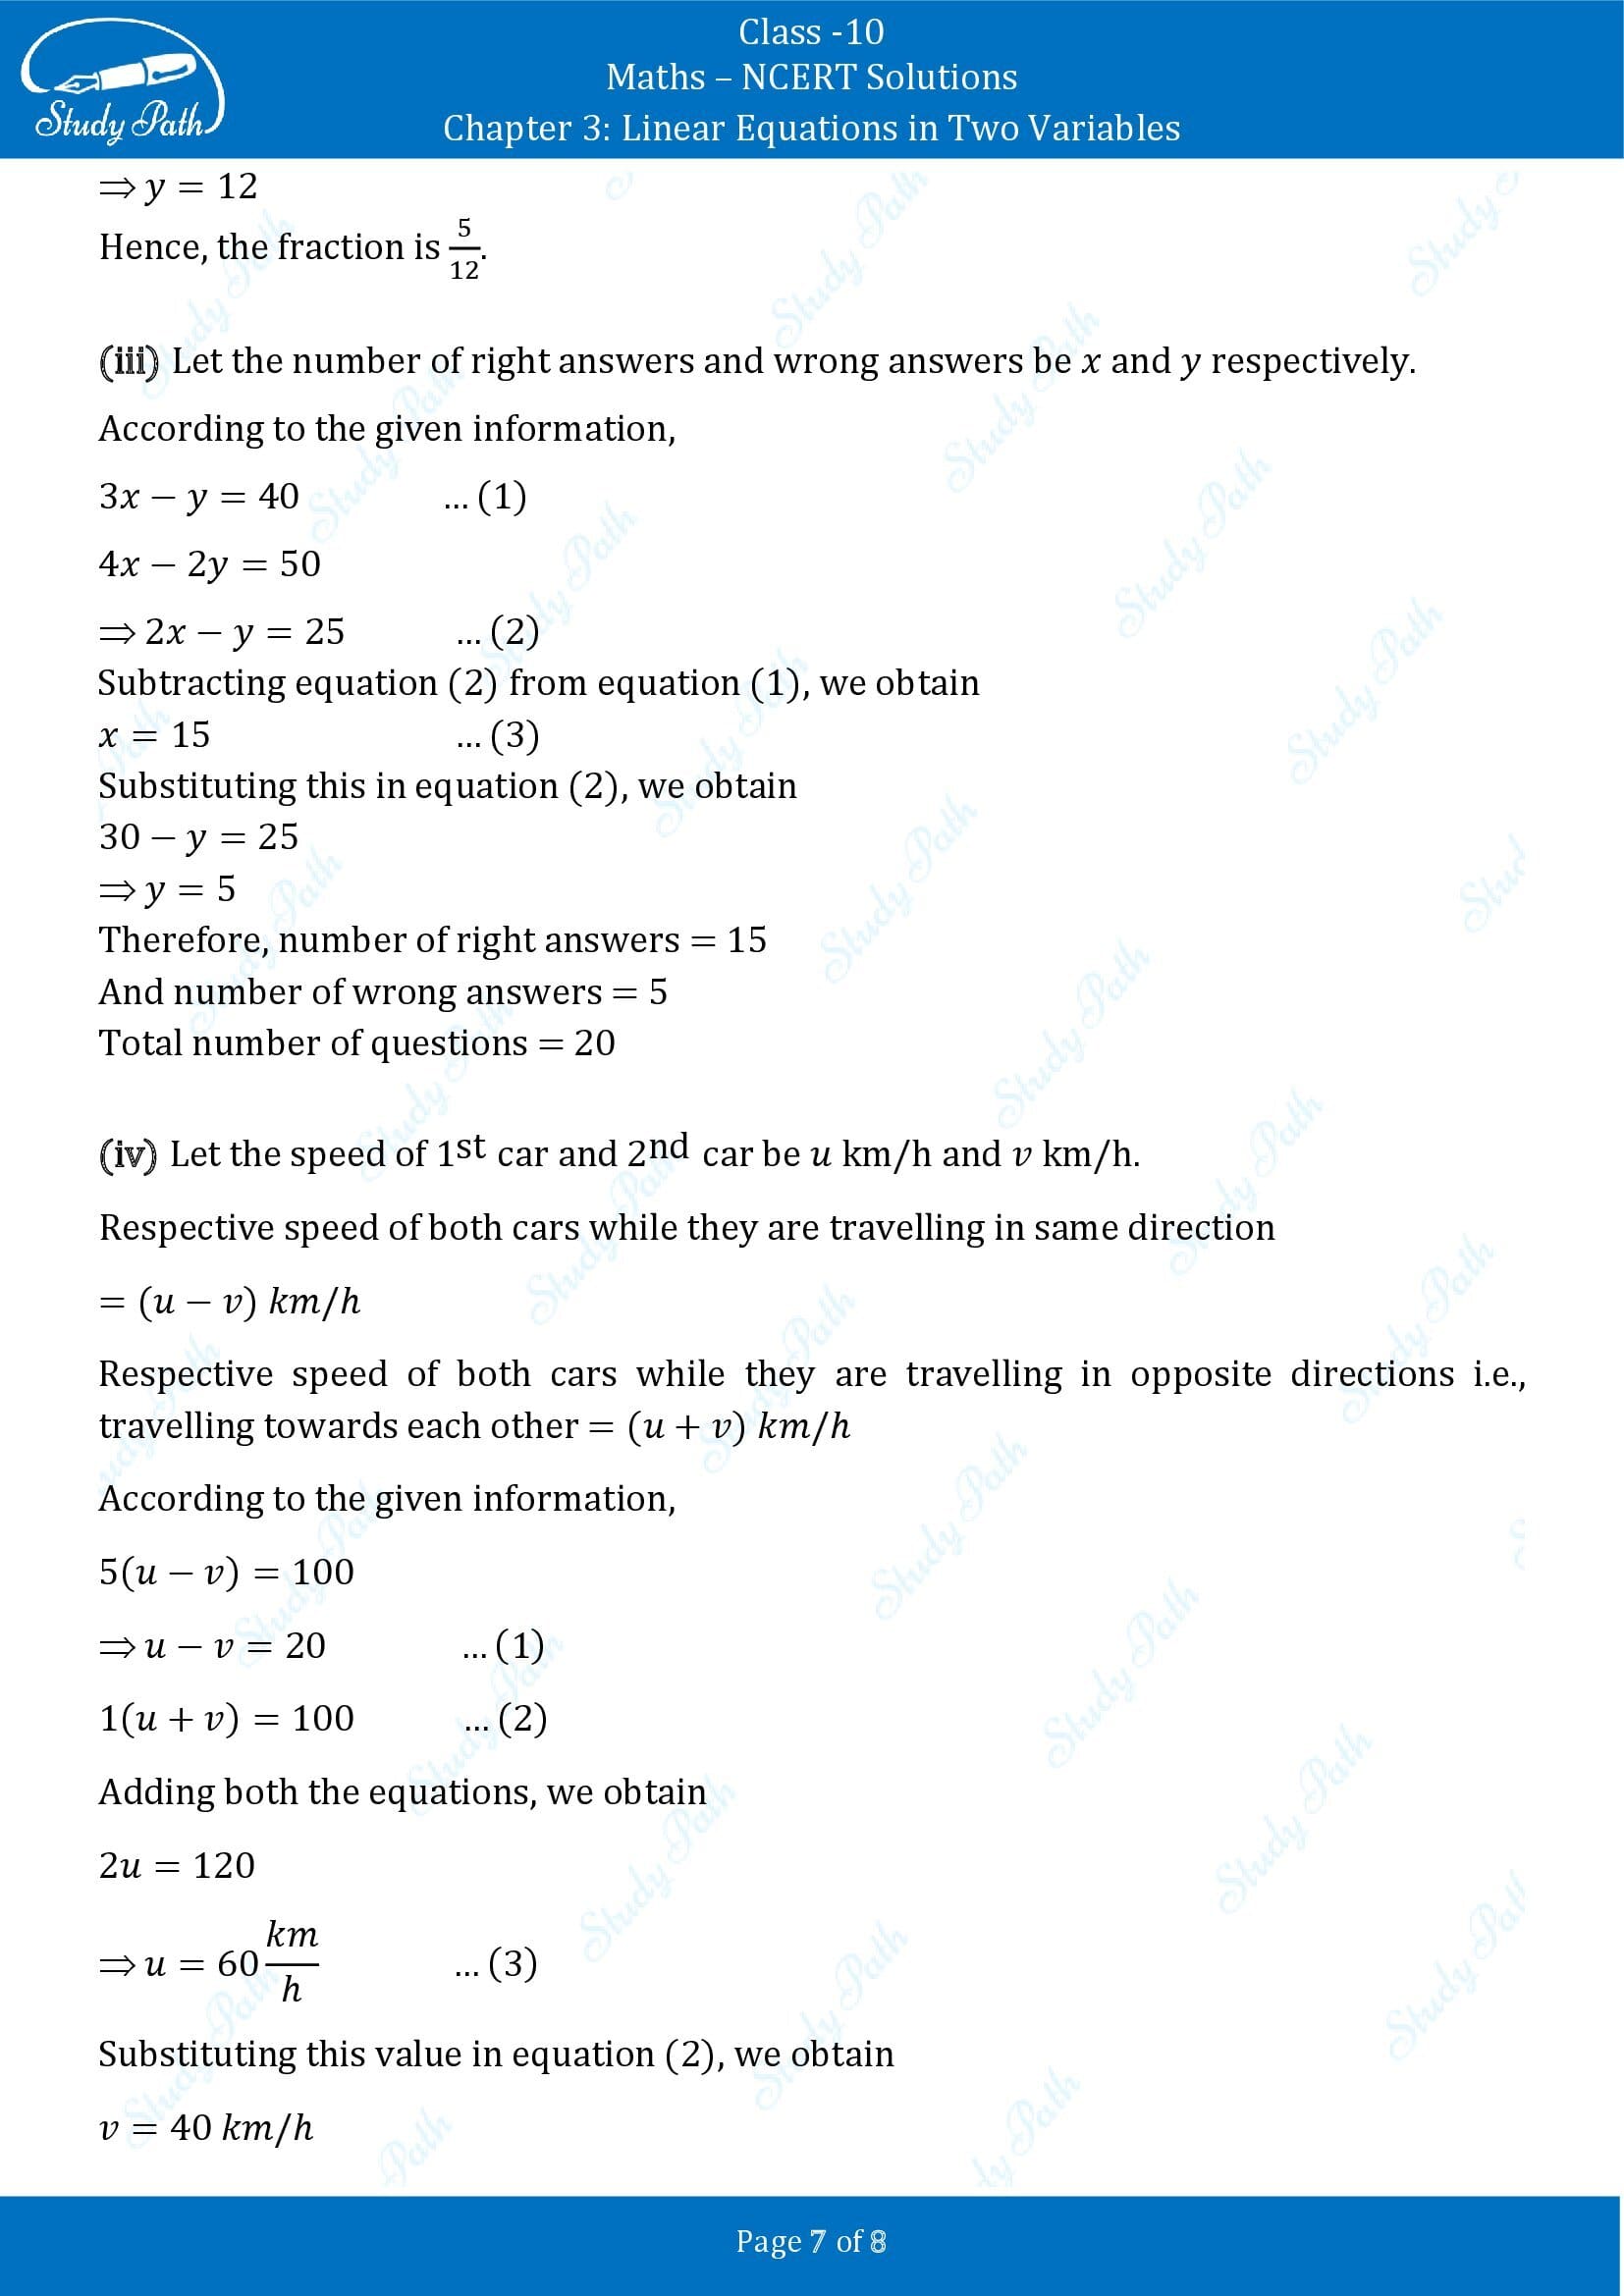 NCERT Solutions for Class 10 Maths Chapter 3 Linear Equations in Two Variables Exercise 3.5 00007